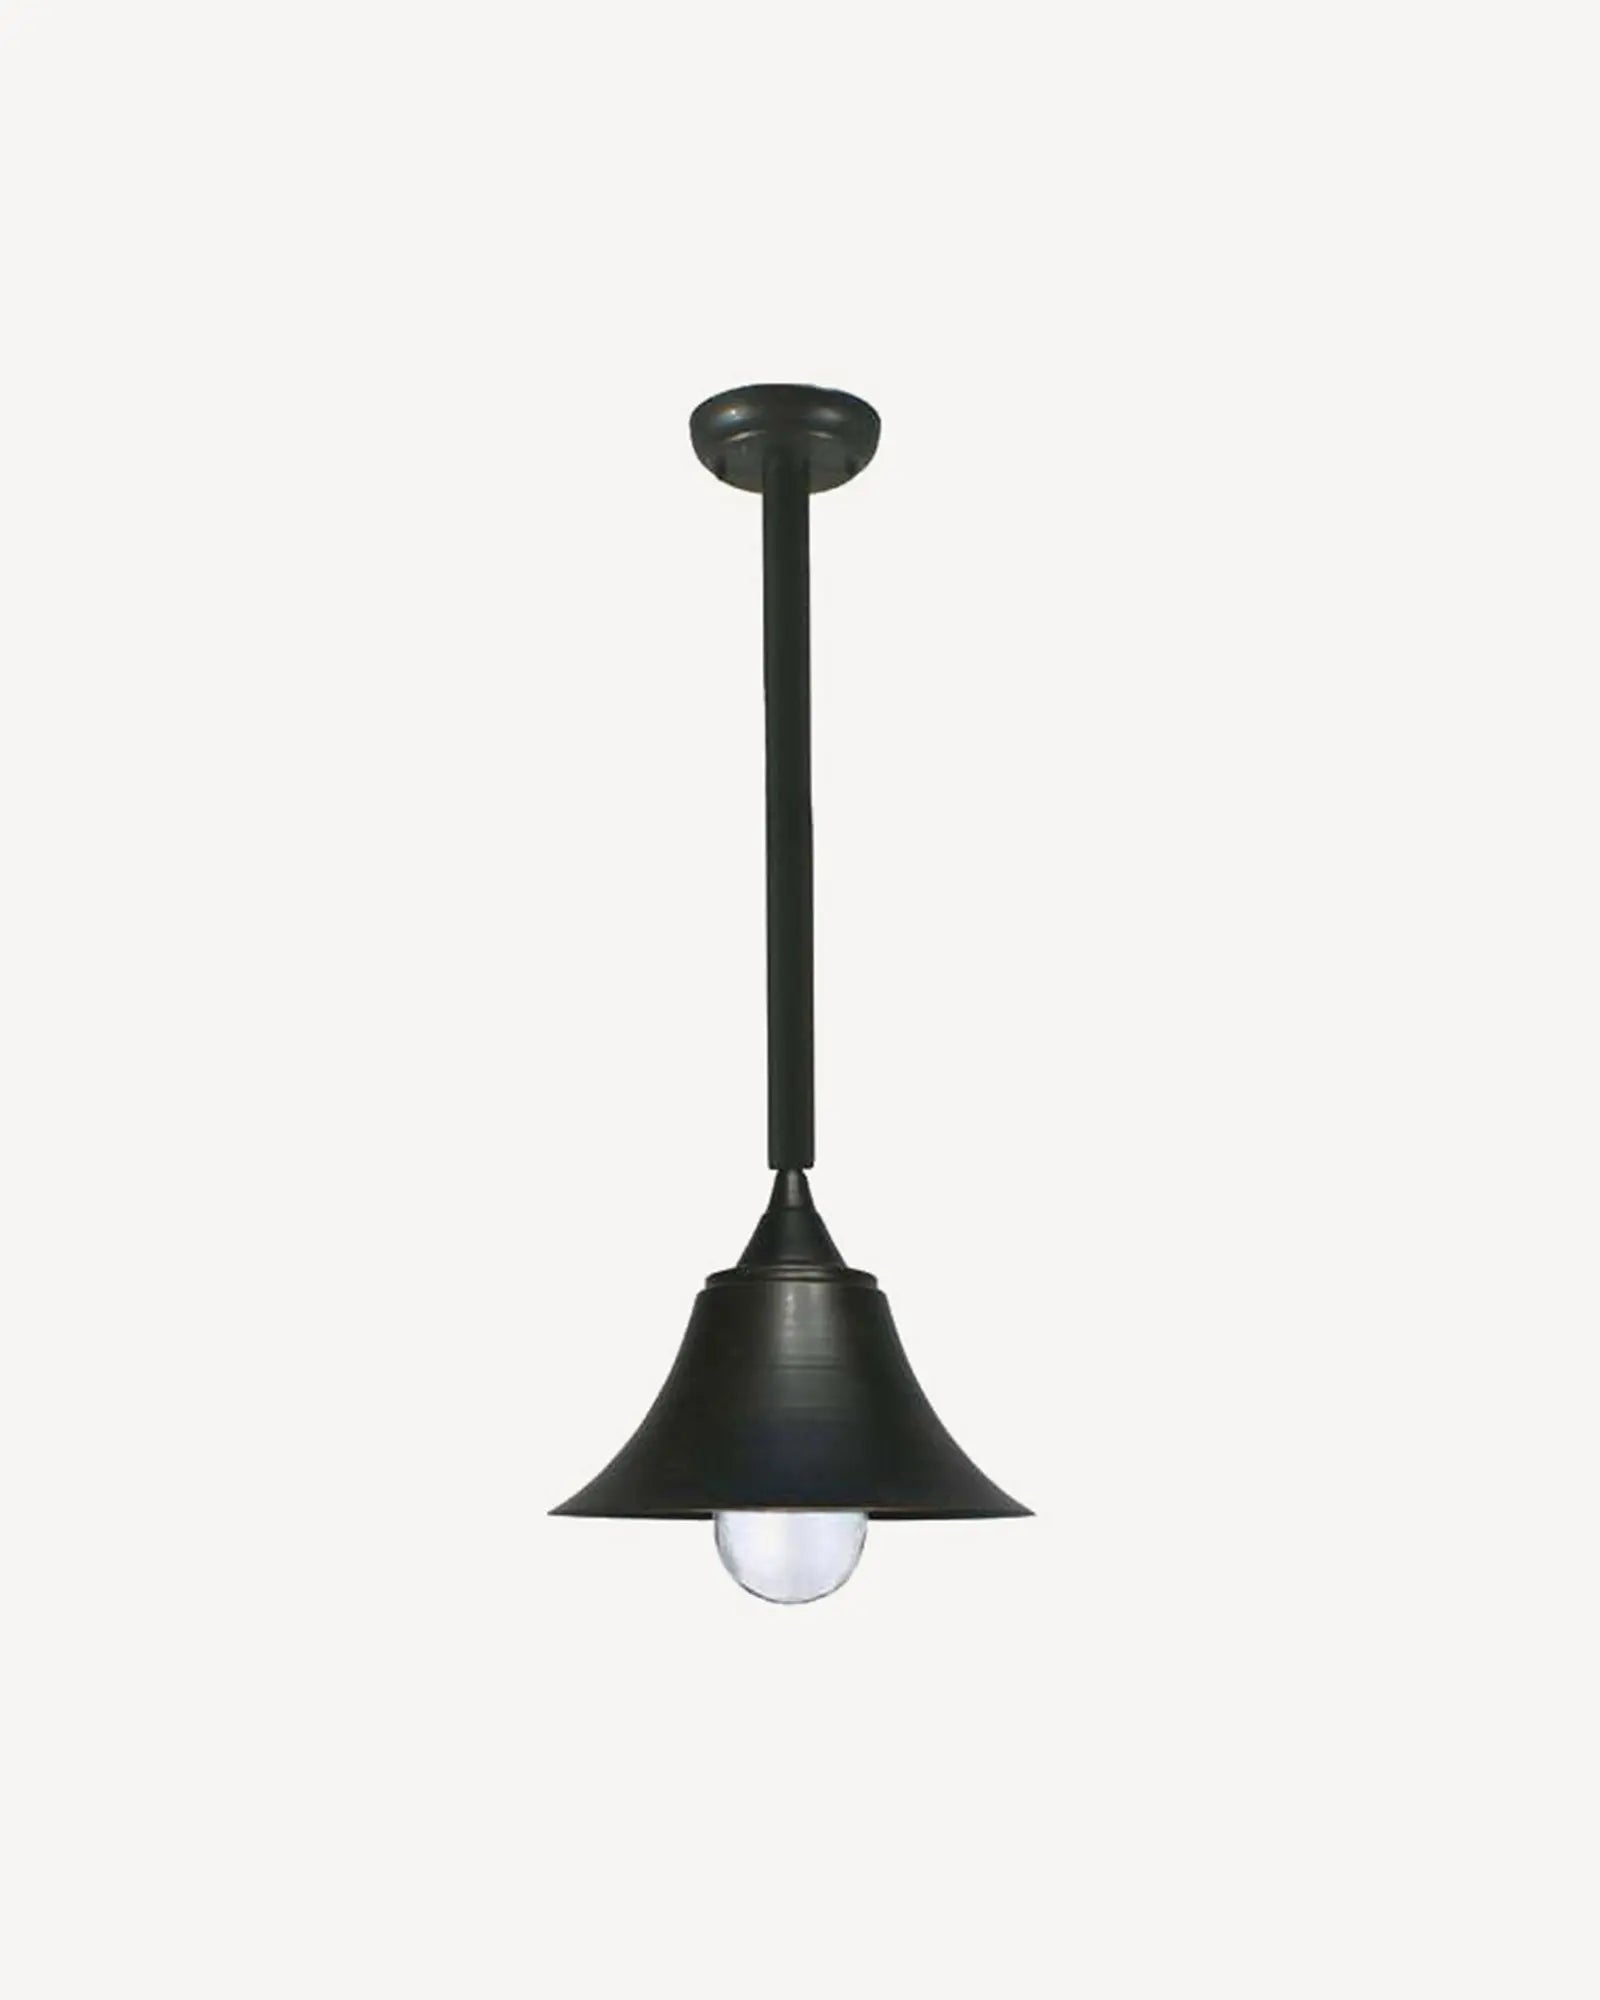 Causeway Rod Outdoor Pendant Light by Inspiration Light at Nook Collections